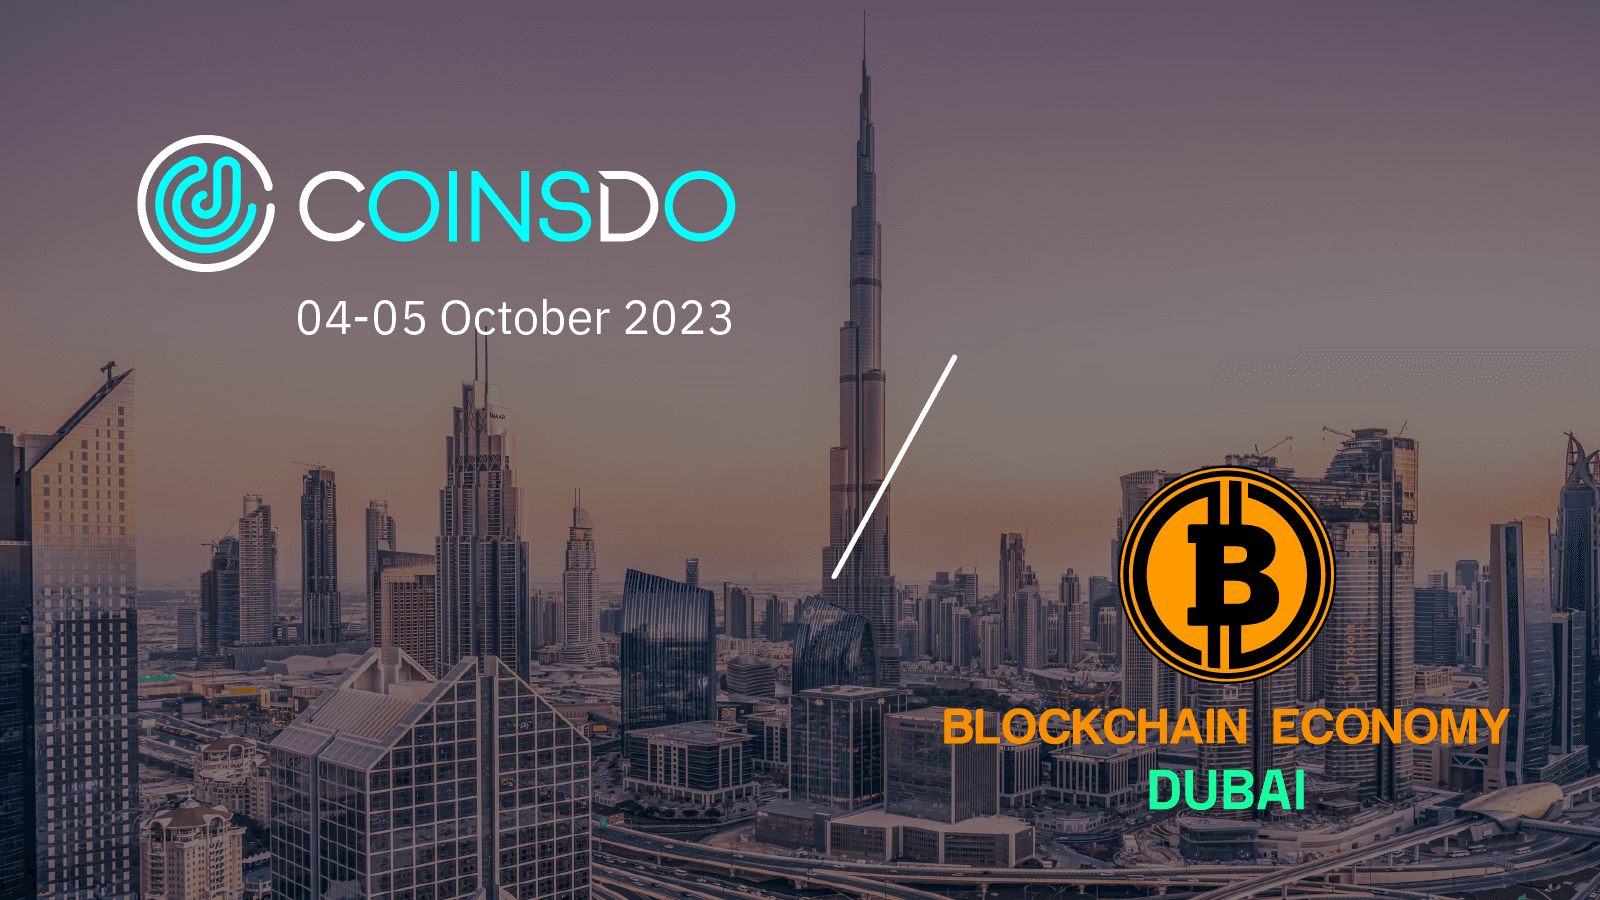 CoinsDo Champions the Pursuit of Digital Asset Security in the Web3 Era at Upcoming Blockchain Economy Summit in Dubai